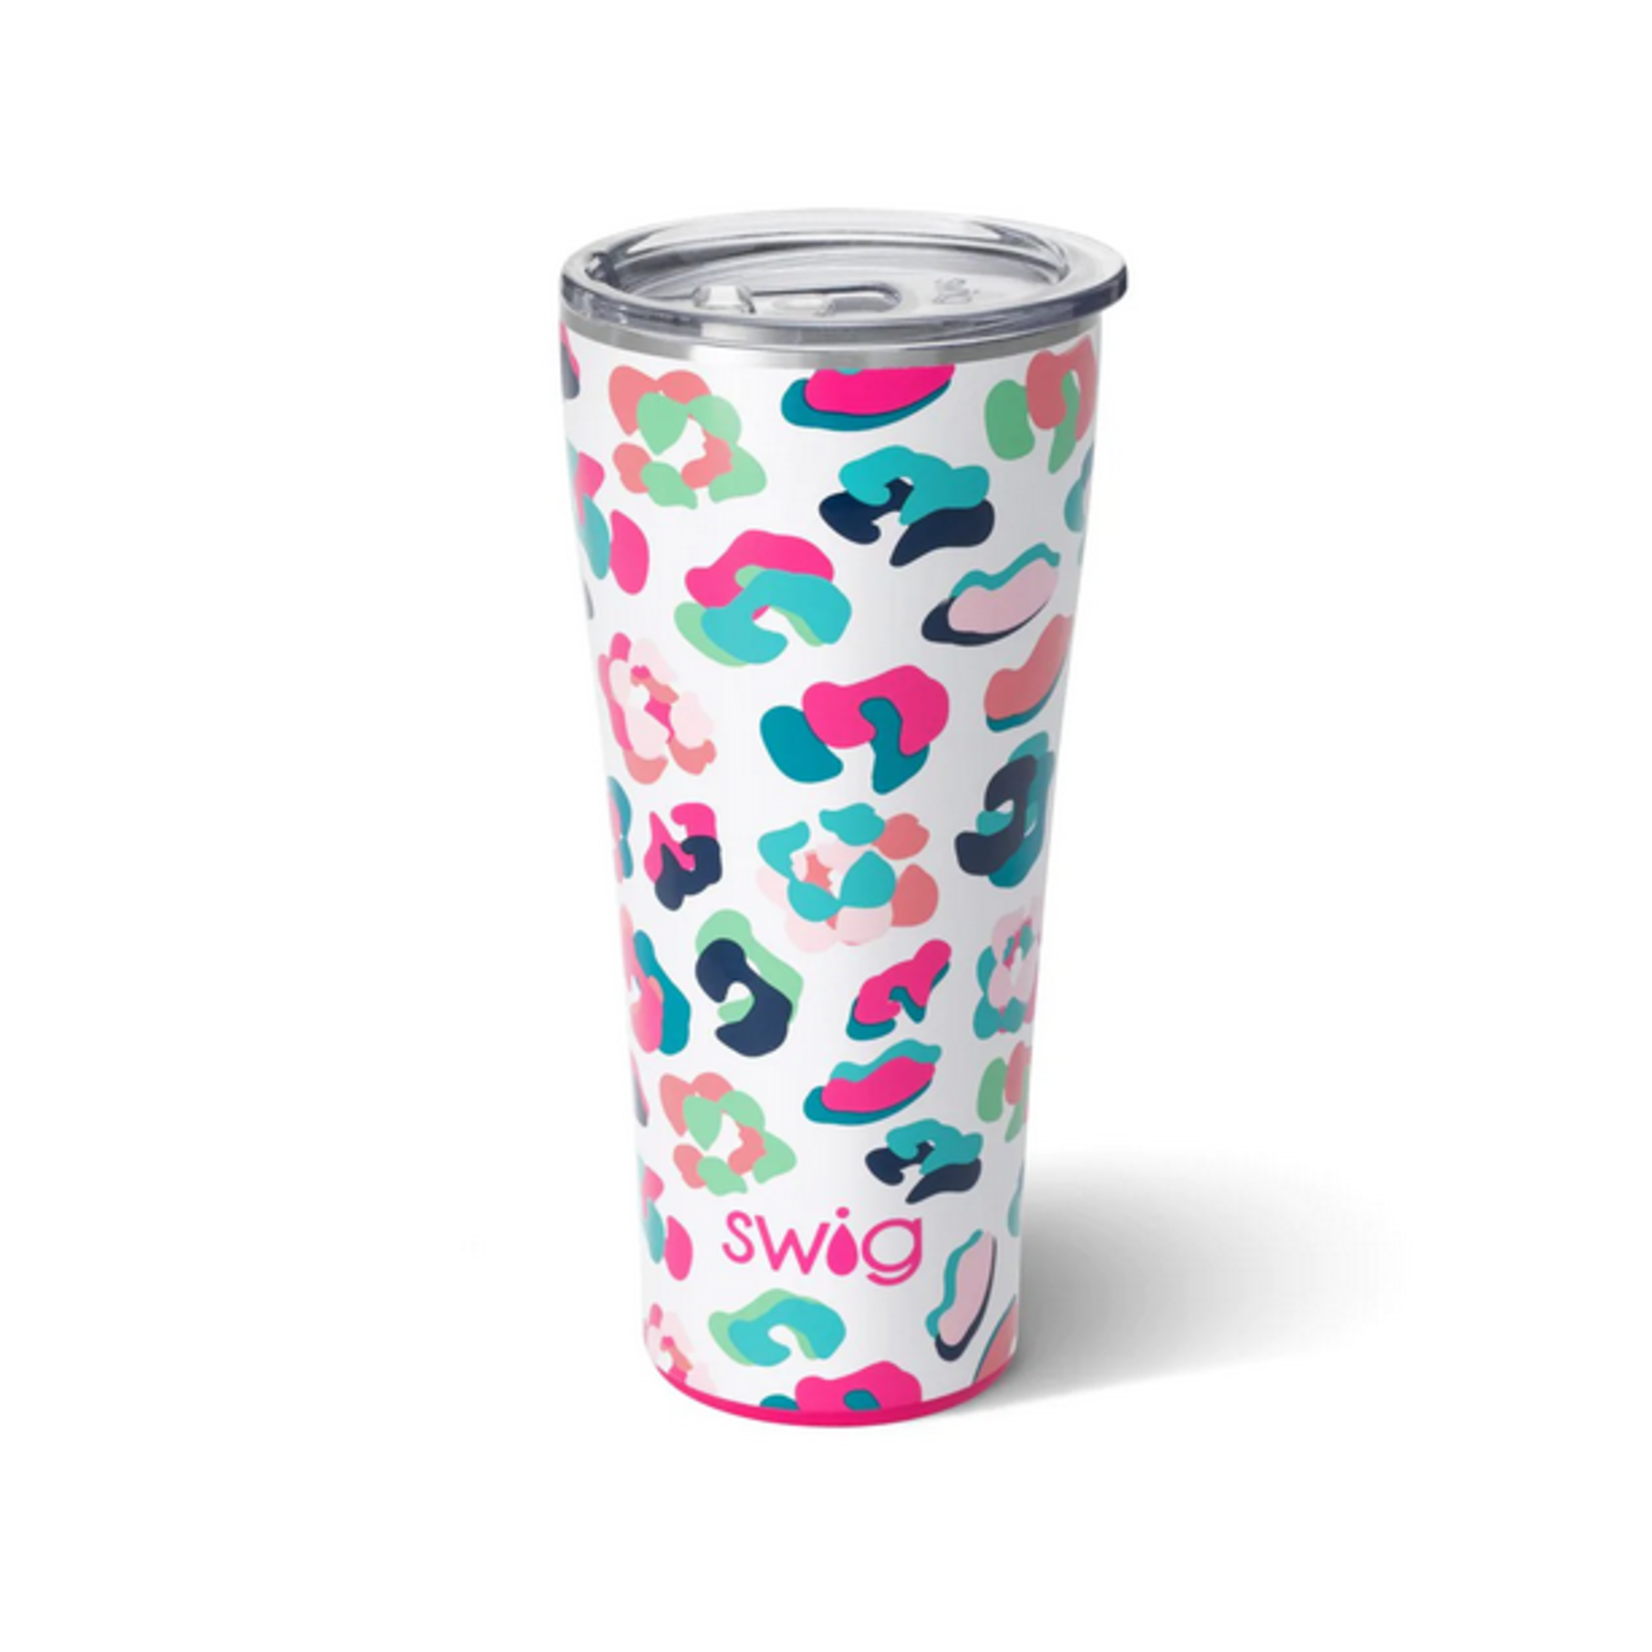 Swig - 32 oz Stainless Steel Insulated Tumbler Party Animal